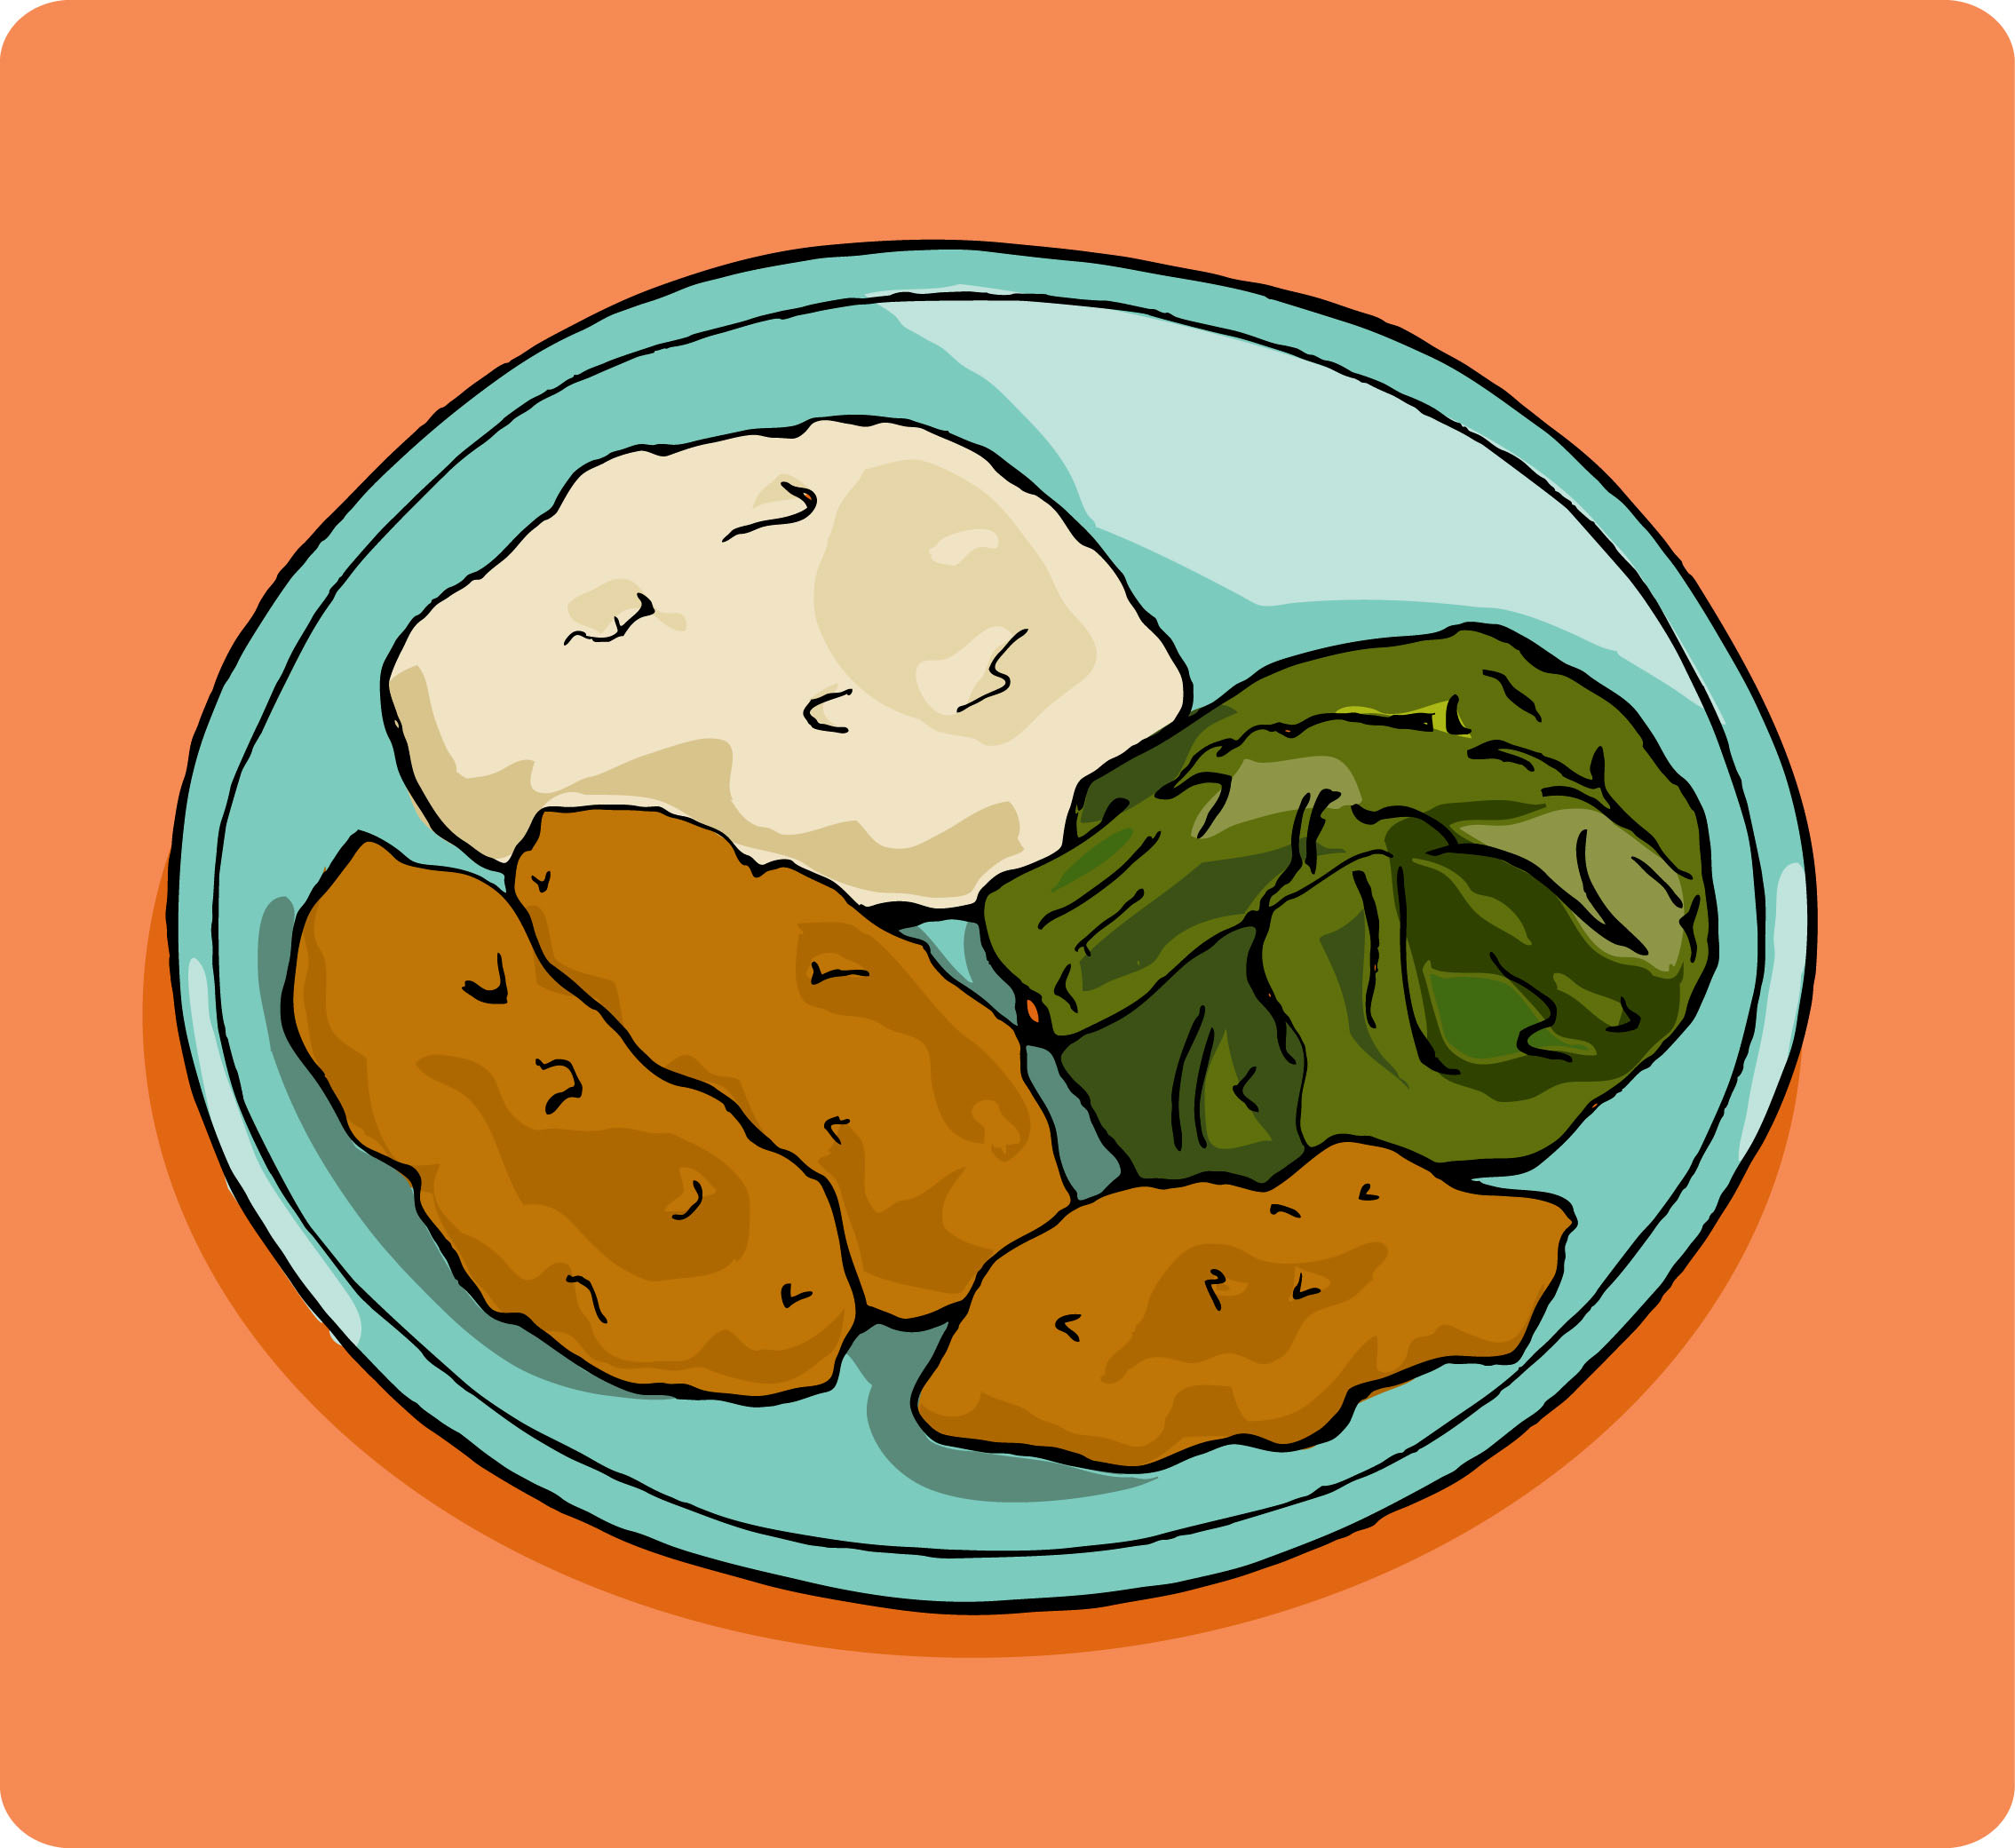 Fried chicken illustrated.